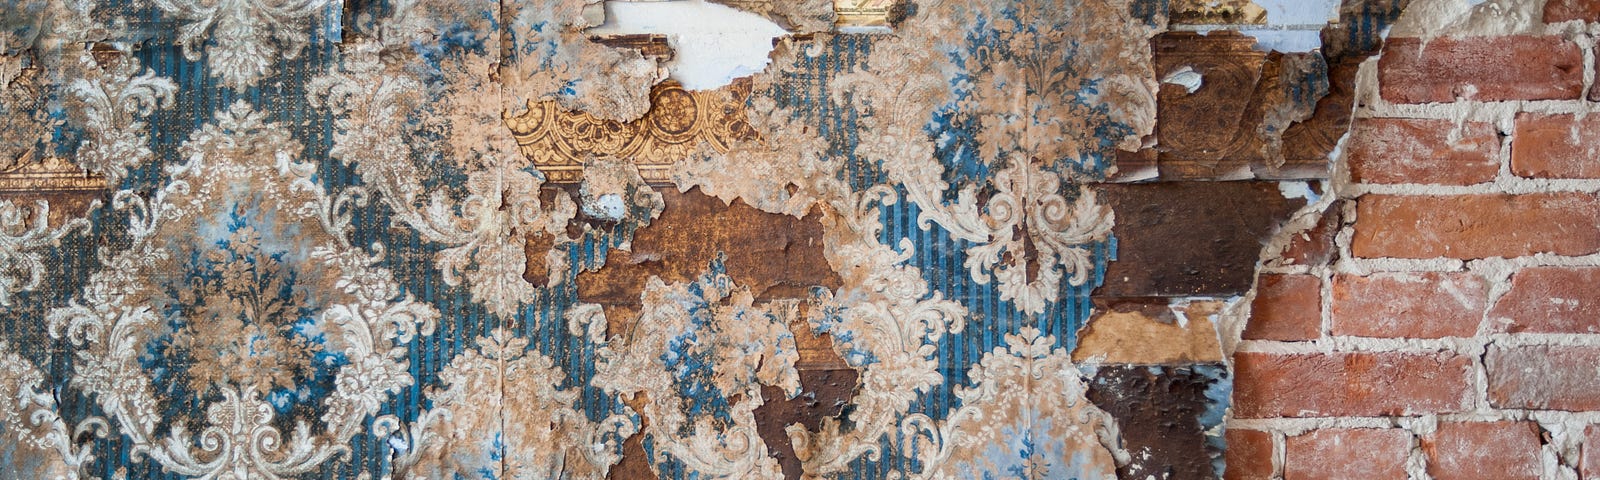 Image of old wallpaper, peeling paint and exposed brickwork